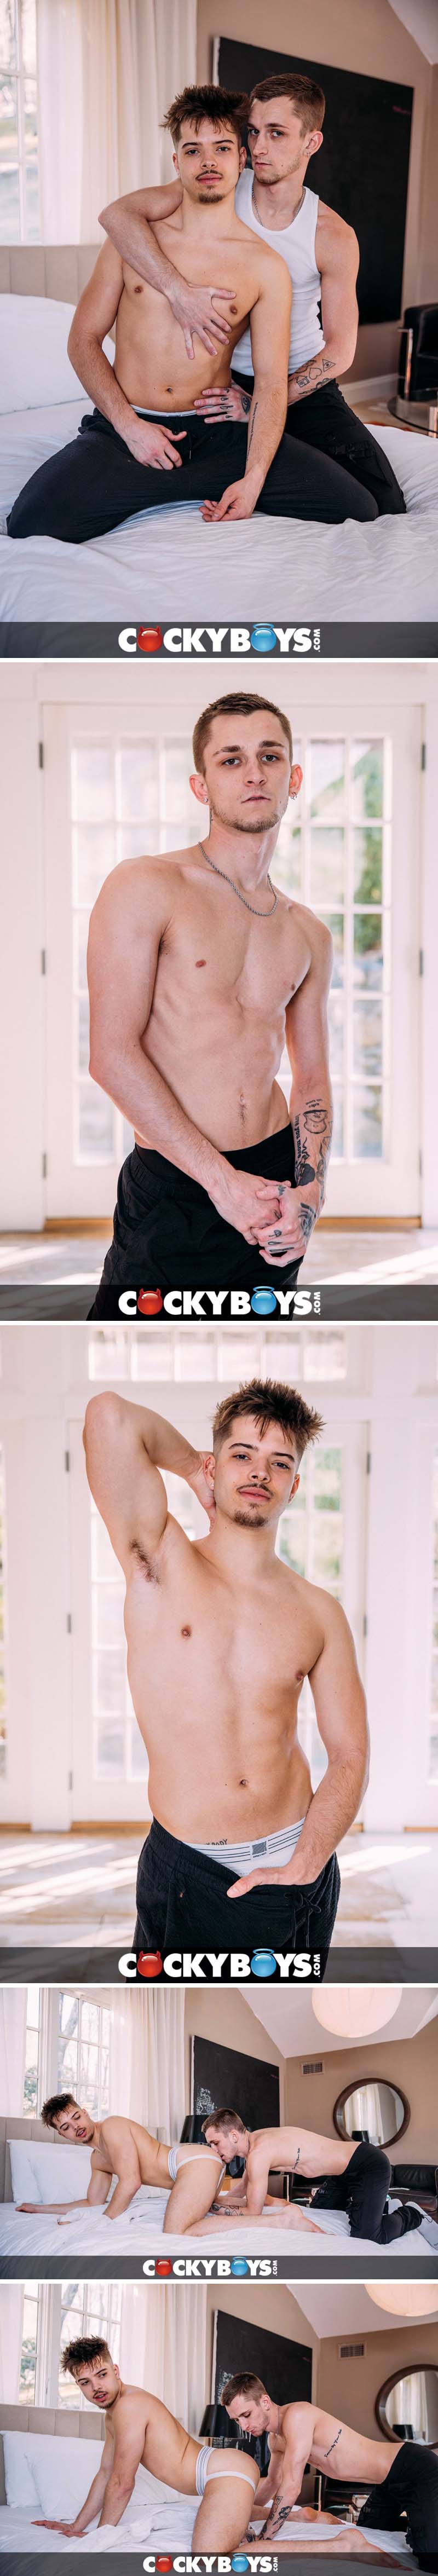 Evan Knoxx Bottoms For Theo Brady at CockyBoys